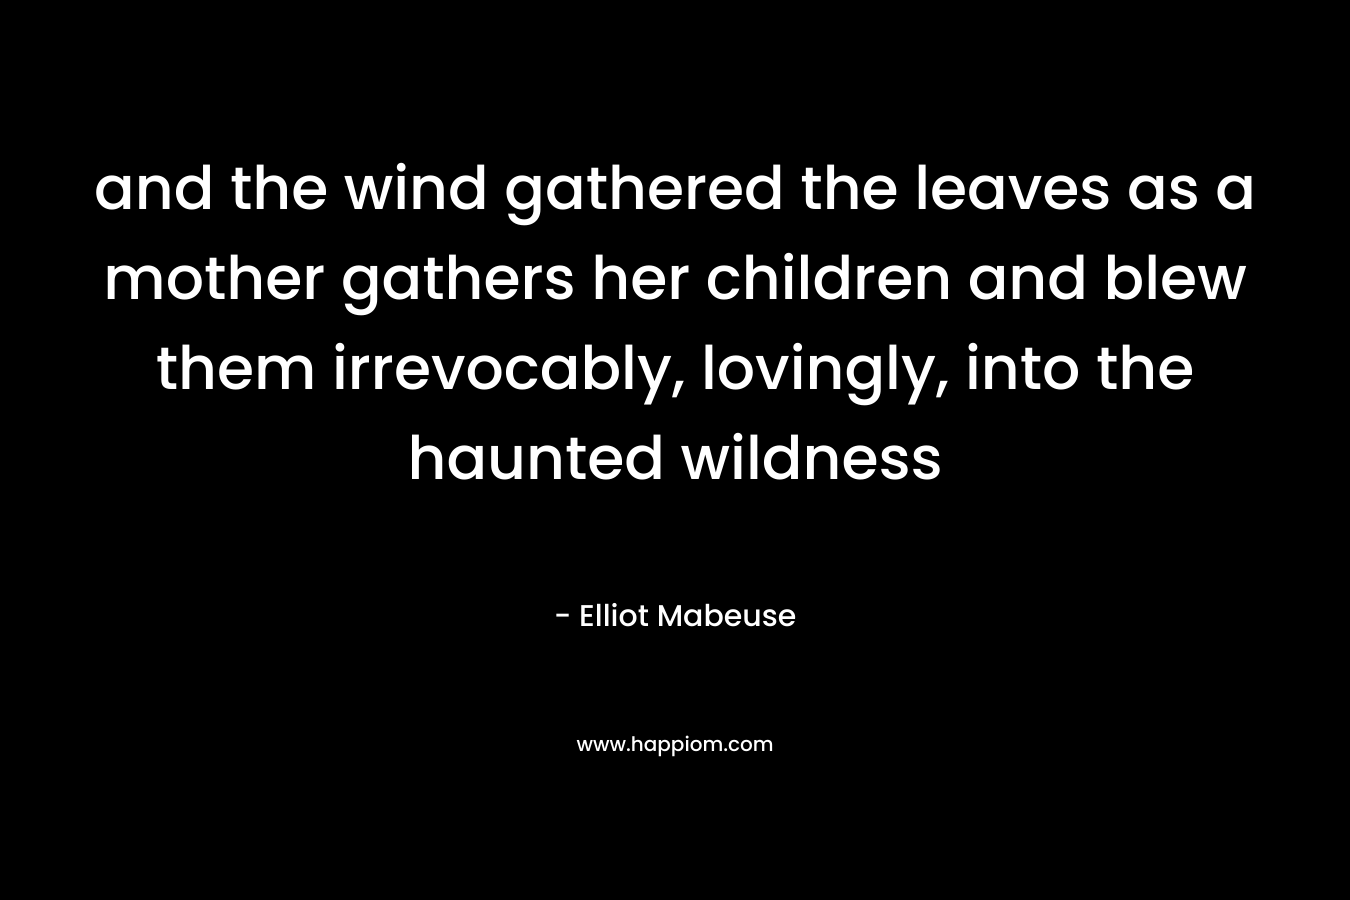 and the wind gathered the leaves as a mother gathers her children and blew them irrevocably, lovingly, into the haunted wildness – Elliot Mabeuse